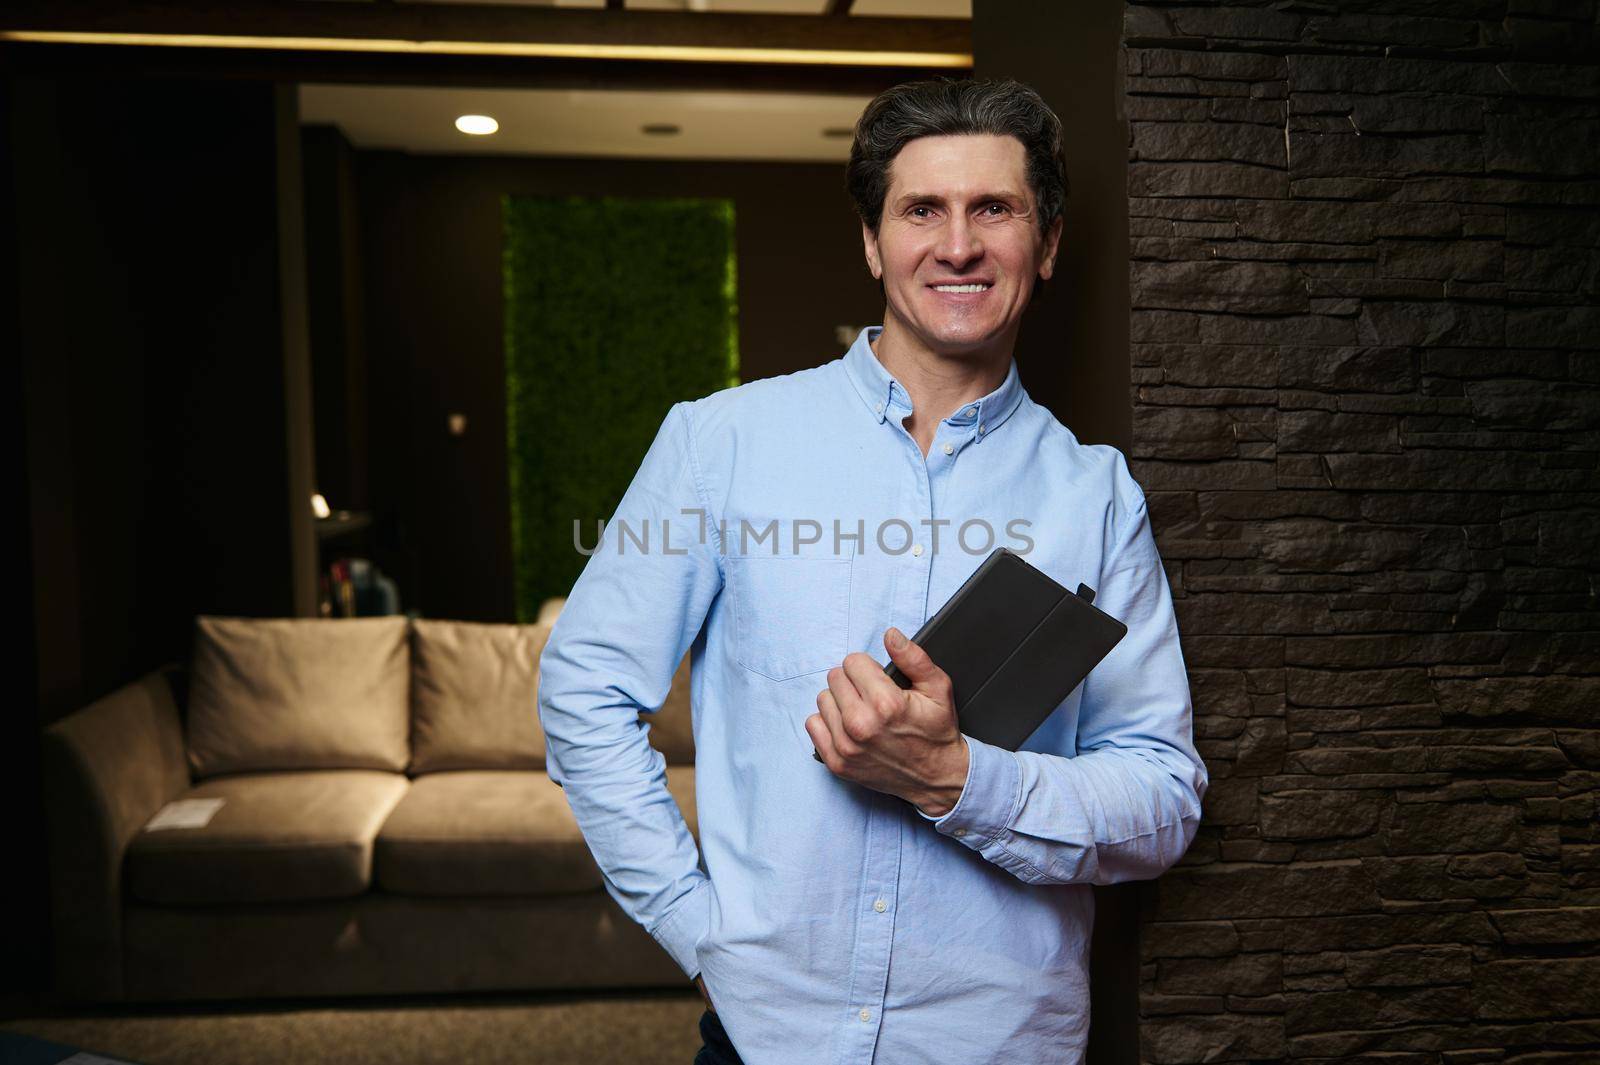 Handsome successful interior designer at home furniture store holding a tablet while smiling at camera. Small business, interior design concept by artgf